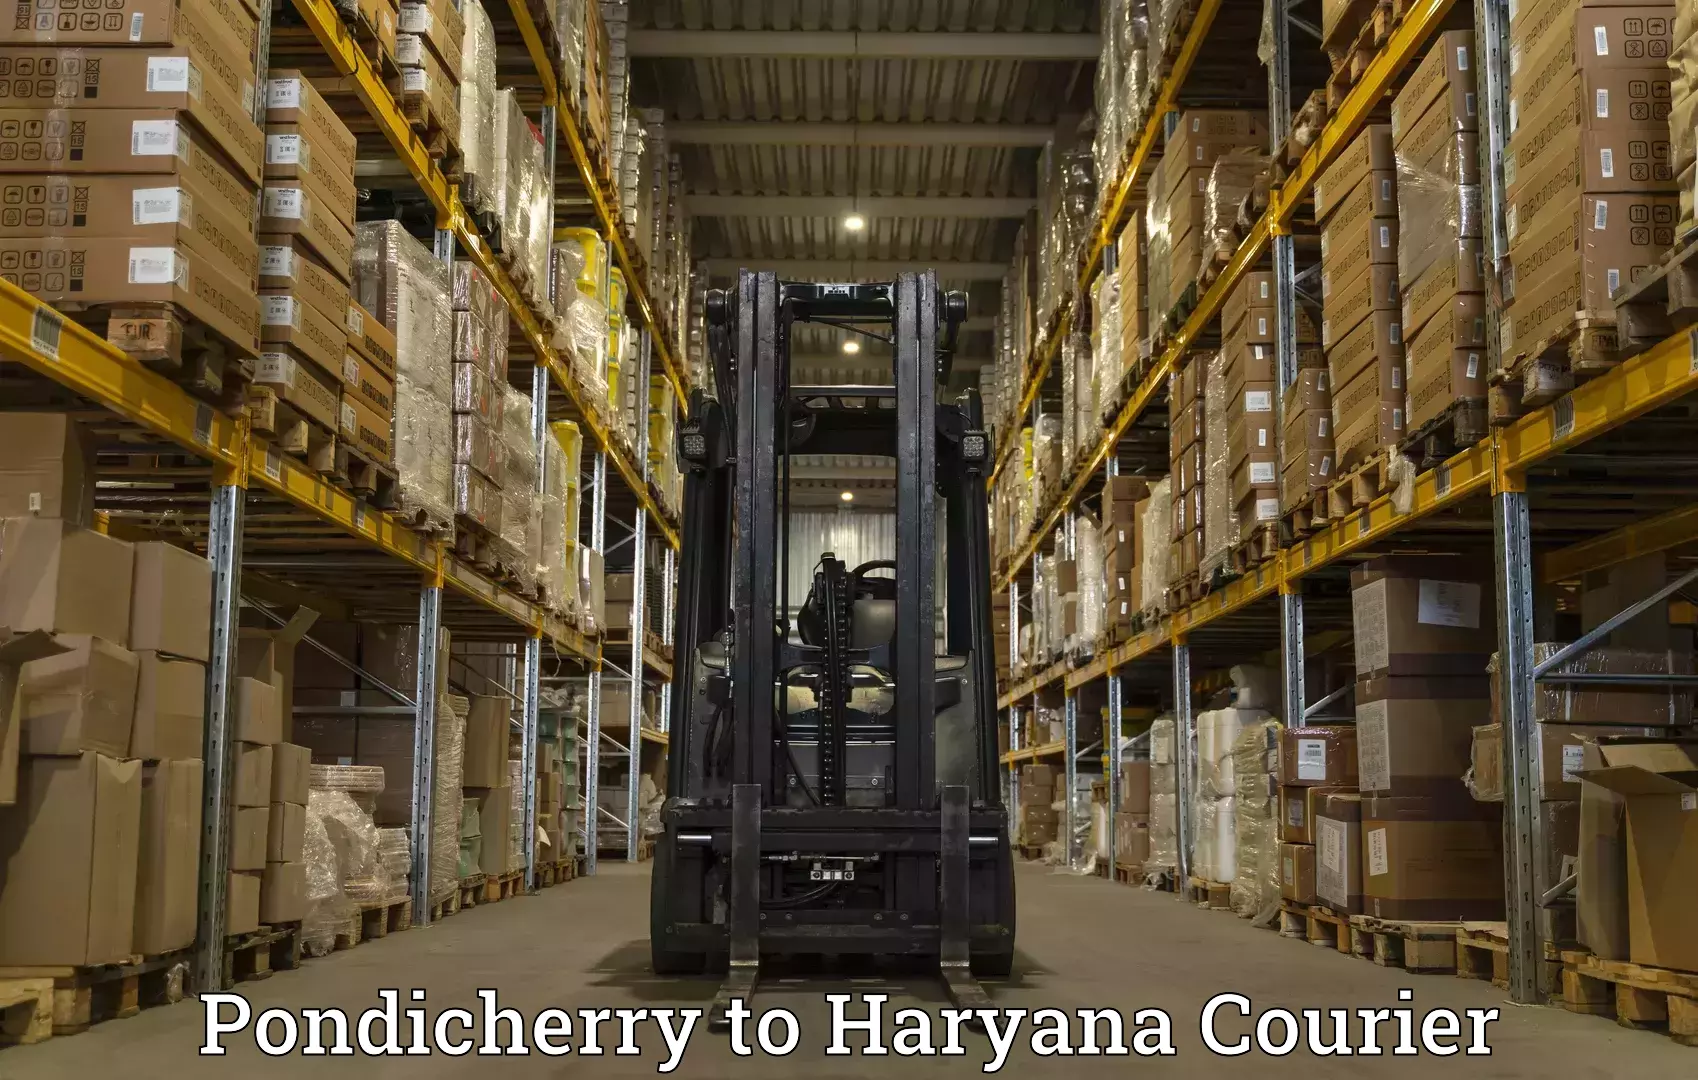 Efficient shipping operations in Pondicherry to Bilaspur Haryana